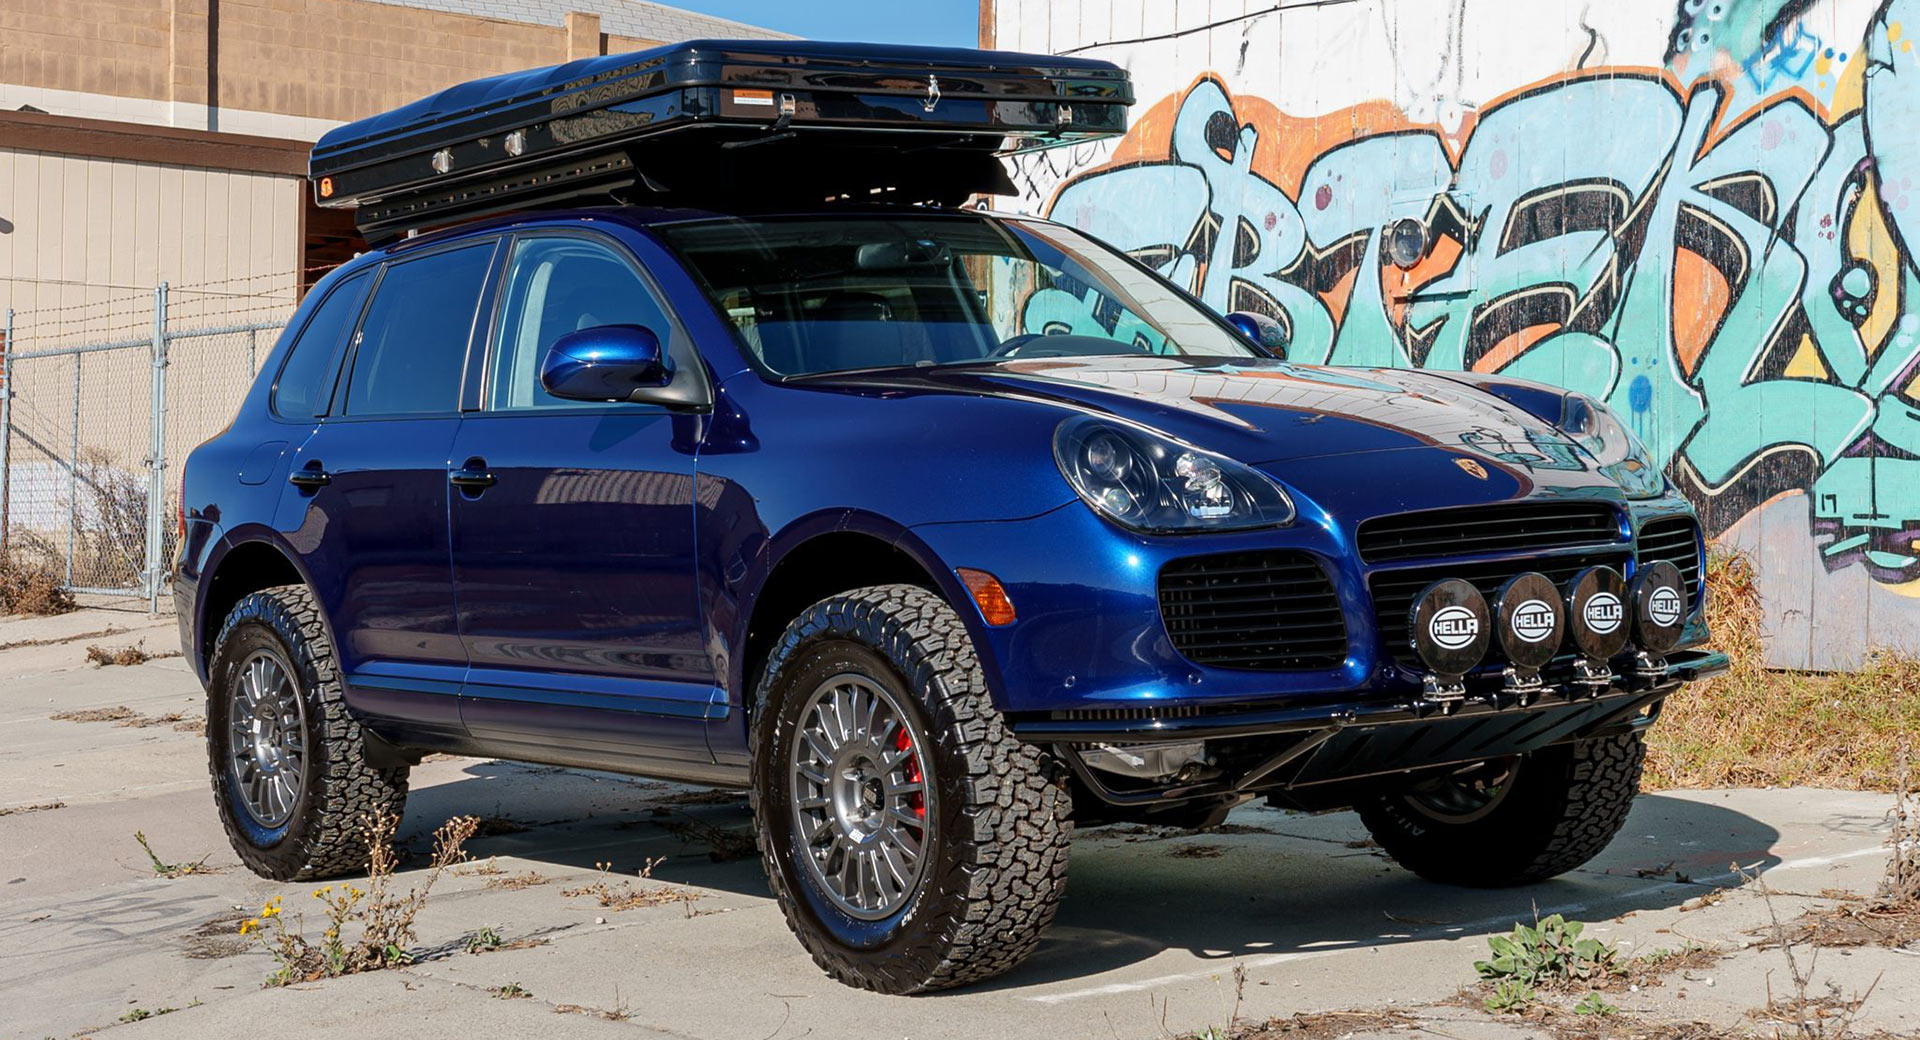 Explore The Wilderness With This Modified 2006 Porsche Cayenne Turbo S |  Carscoops